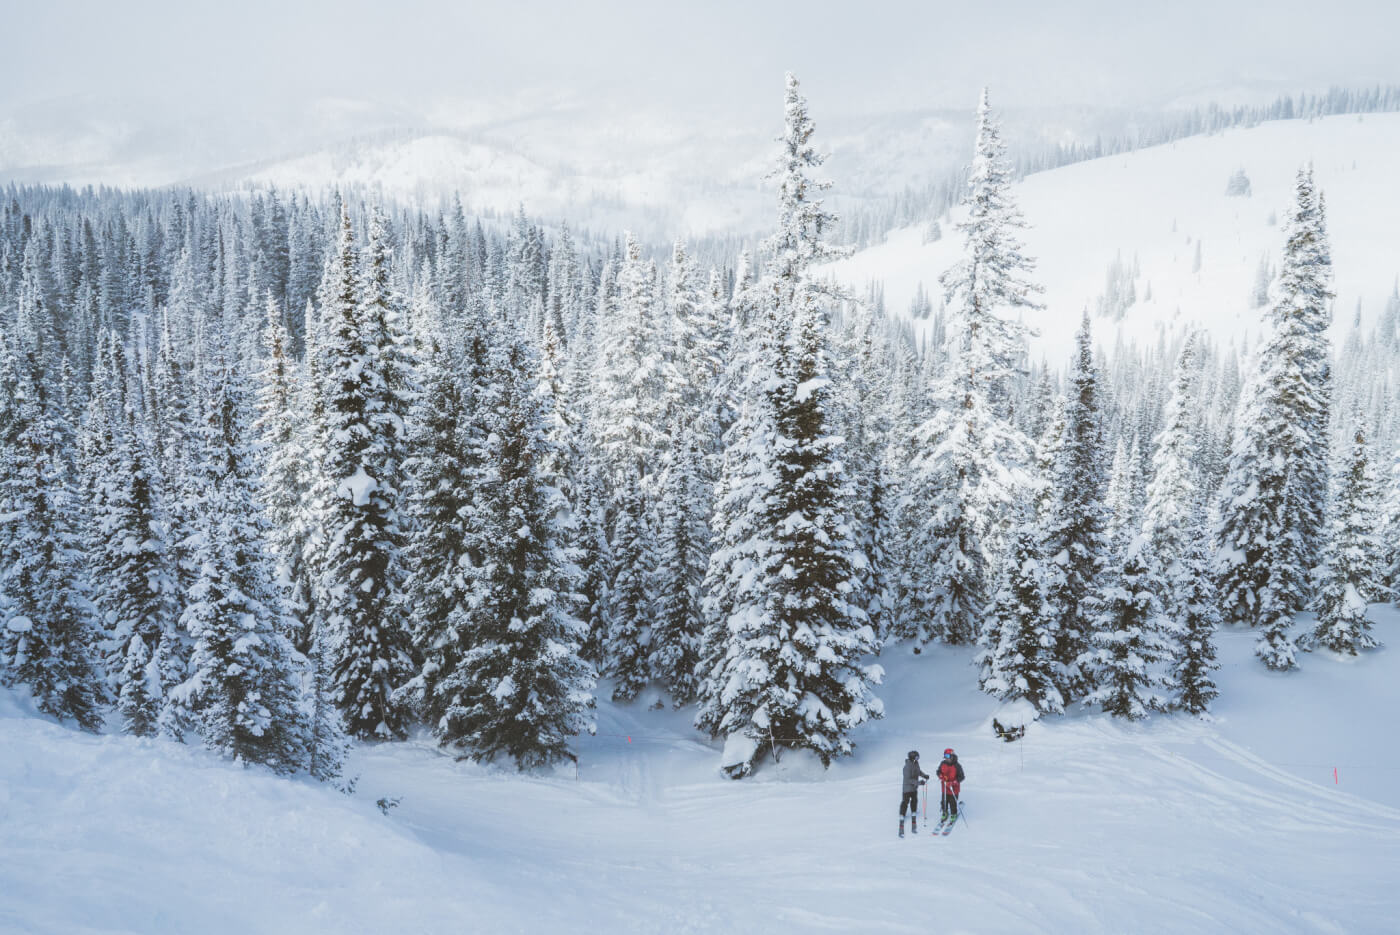 So, You’re Looking for the Best Passes for Colorado Ski Resorts